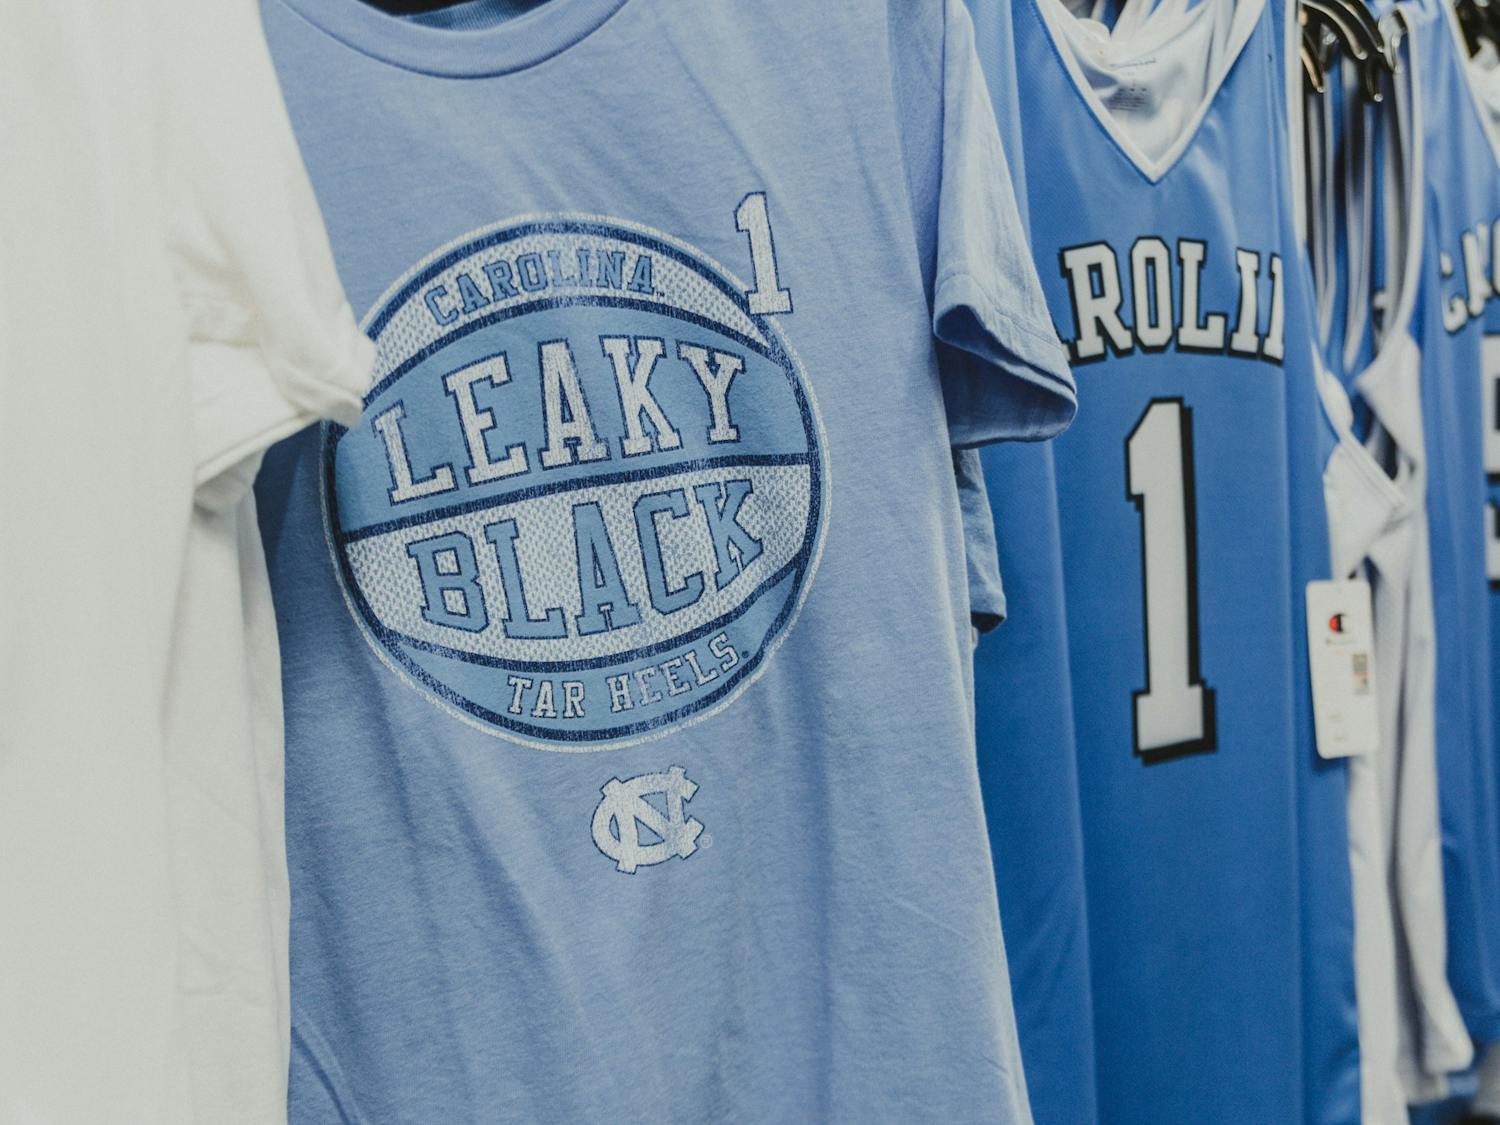 A Leaky Black basketball t-shirt is pictured at Classic Carolina on Wednesday, Nov 2, 2022.